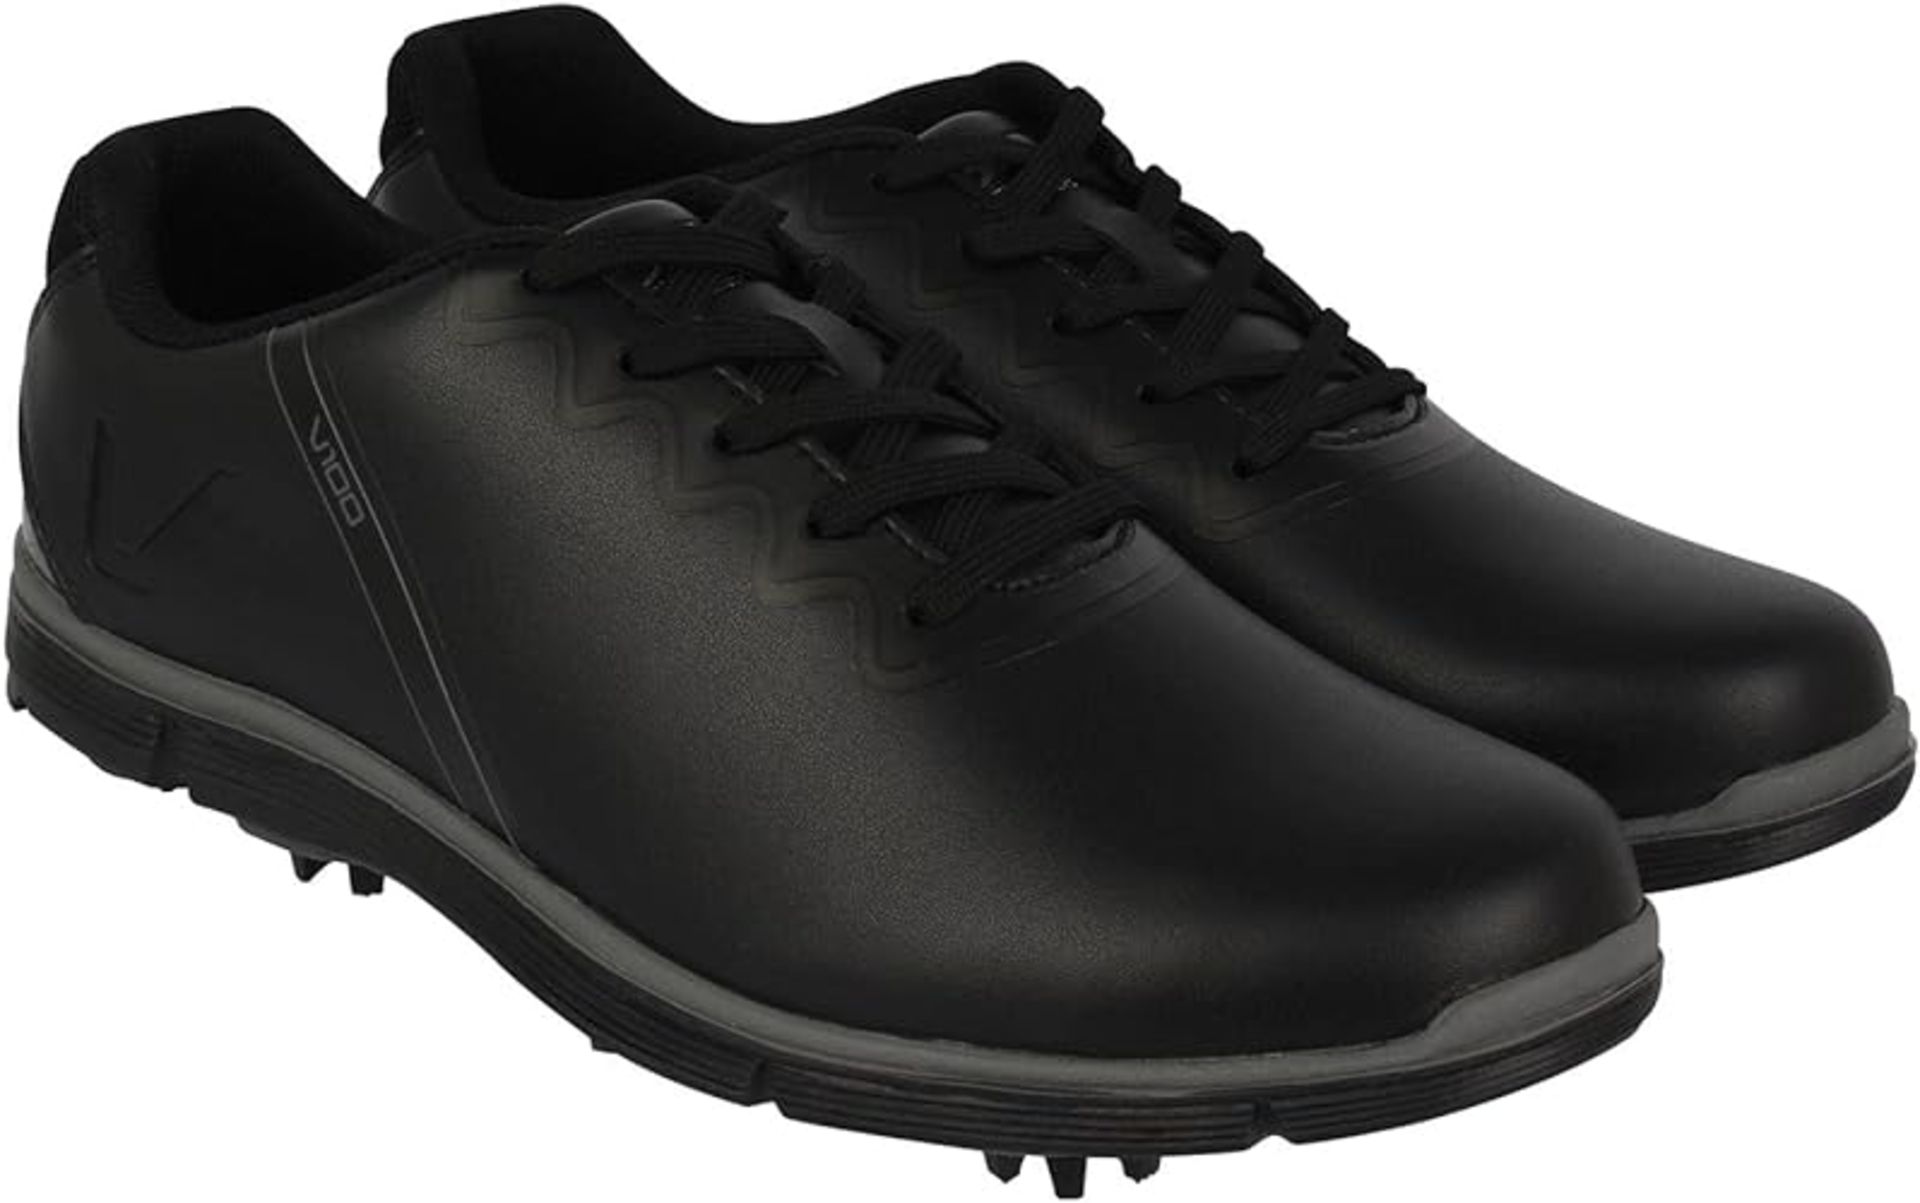 2 X BRAND NEW PAIRS OF SLAZENGER BLACK V100 PROFESSIONAL GOLF SHOES SIZE 10 RRP £89 EACH S1RA - Image 3 of 3